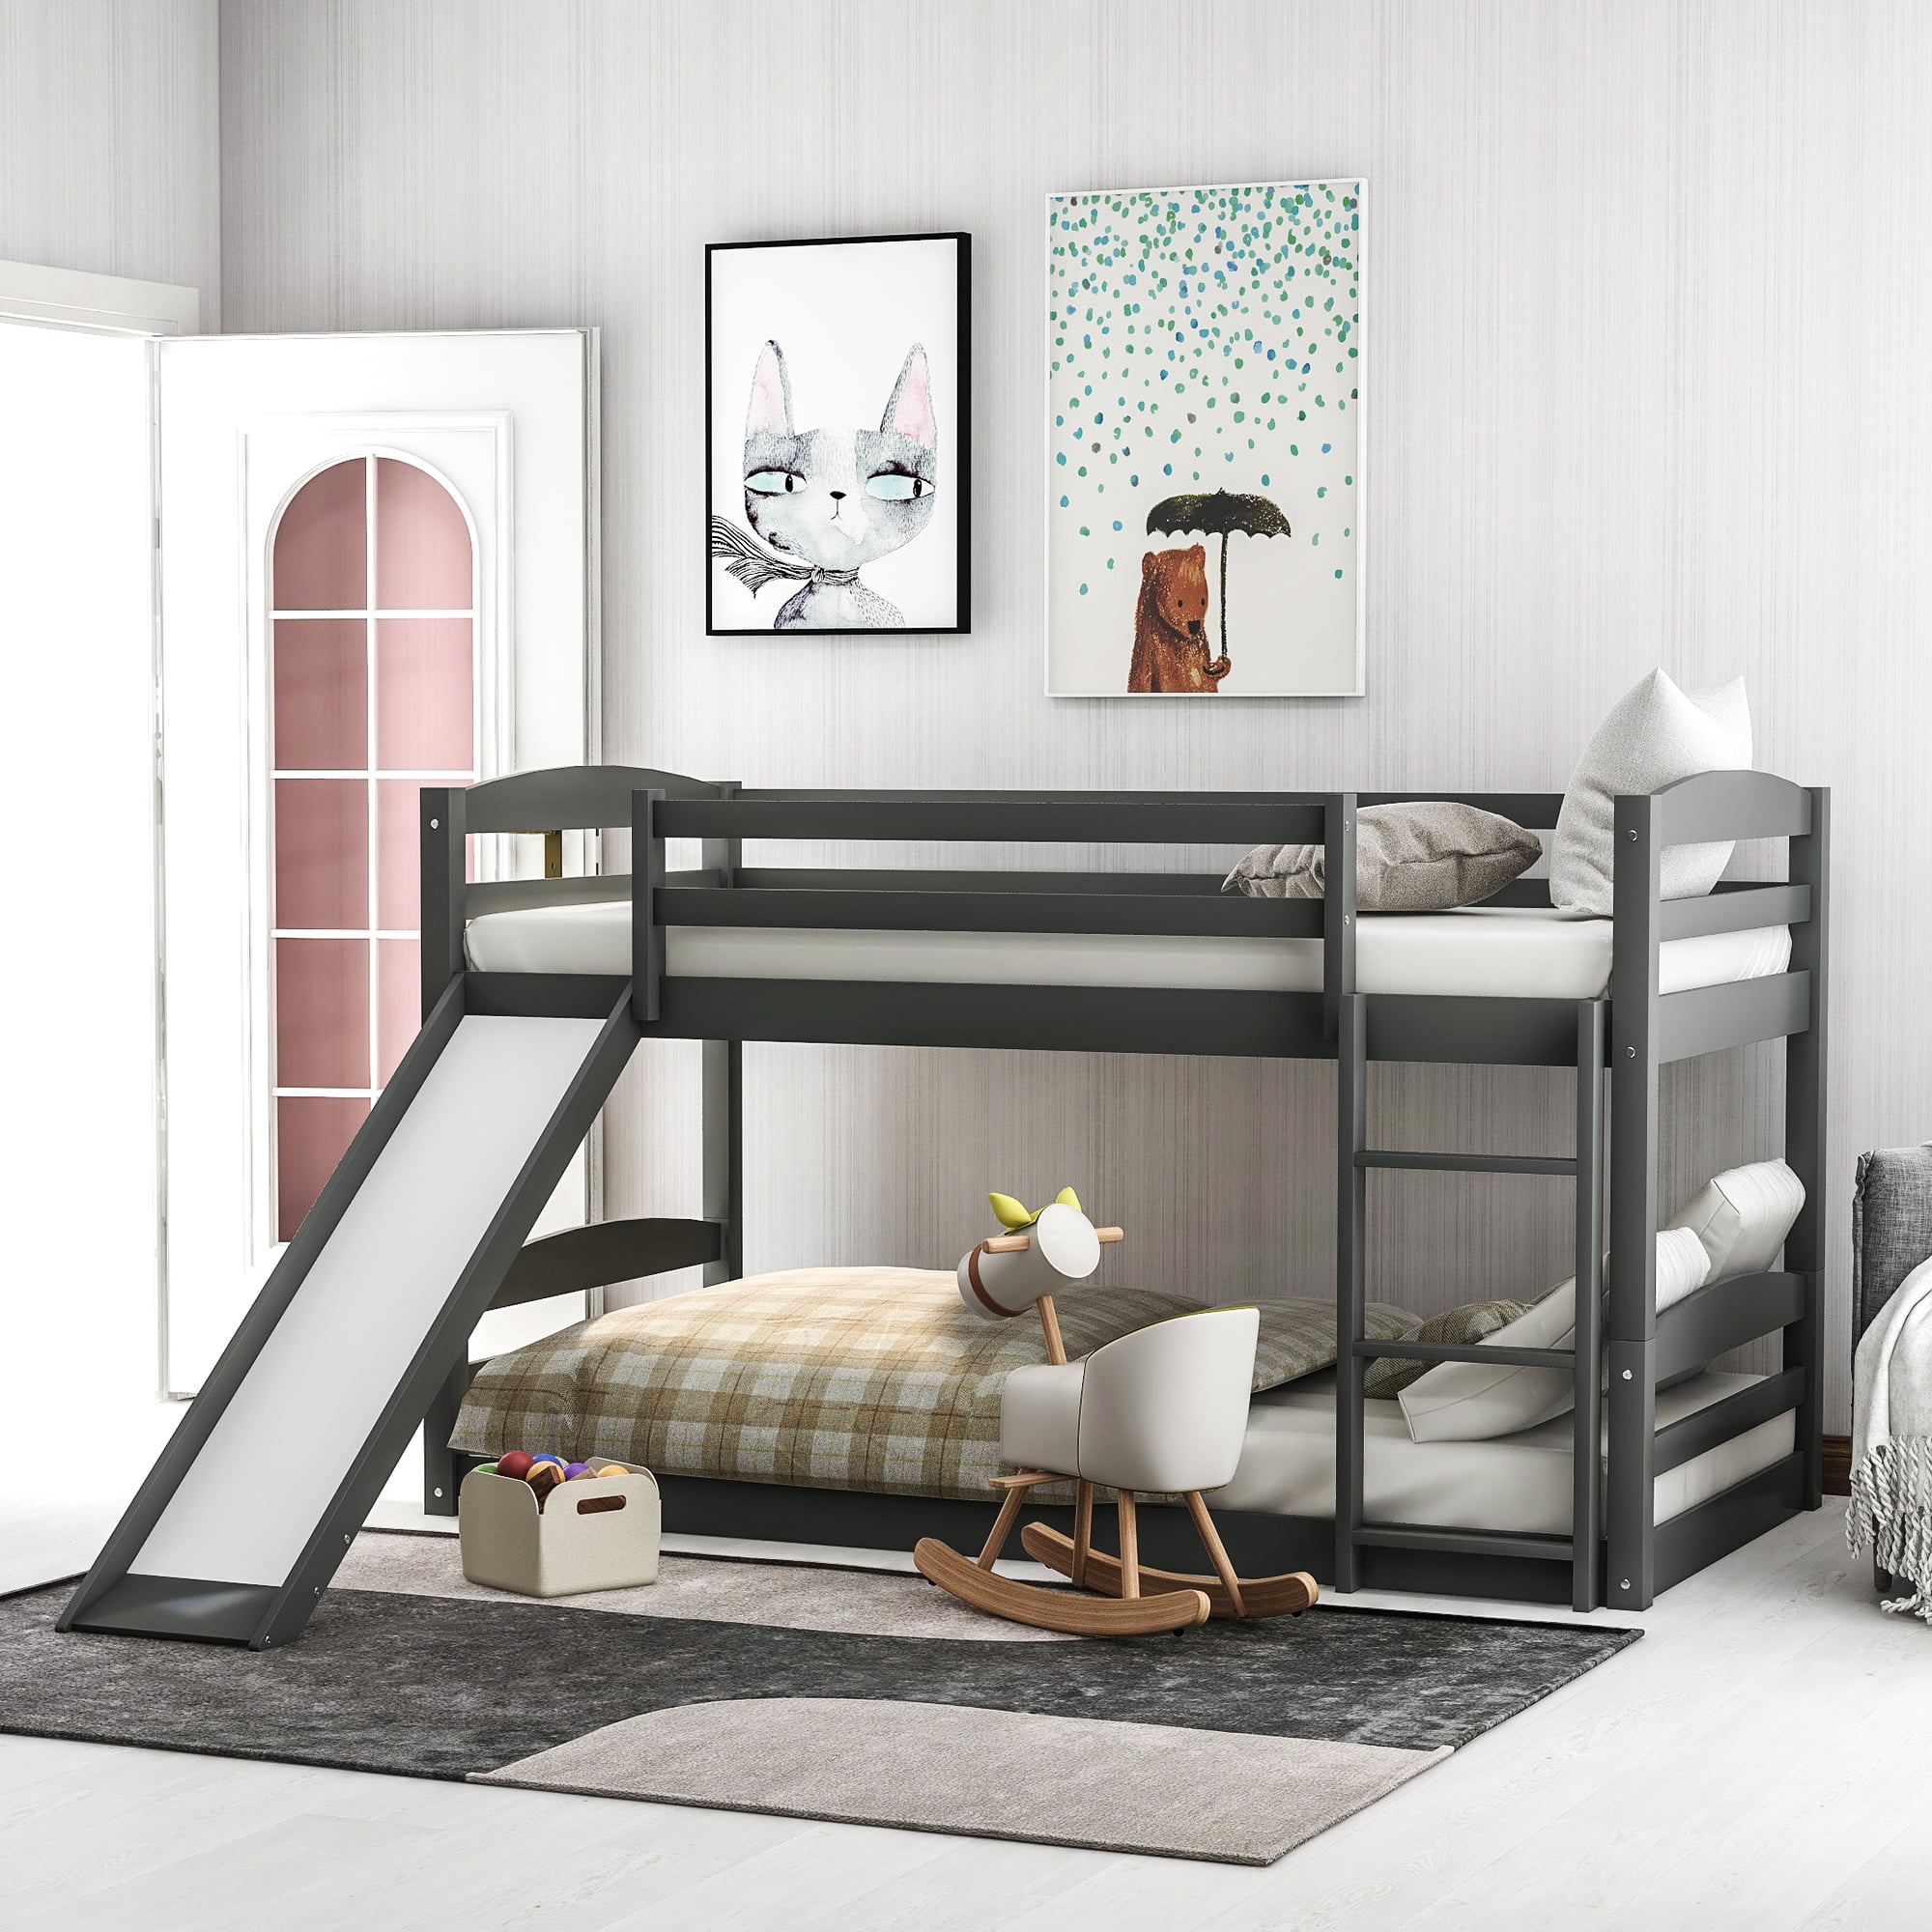 Twin Over Low Bunk Bed With Slide, Short Height Bunk Beds